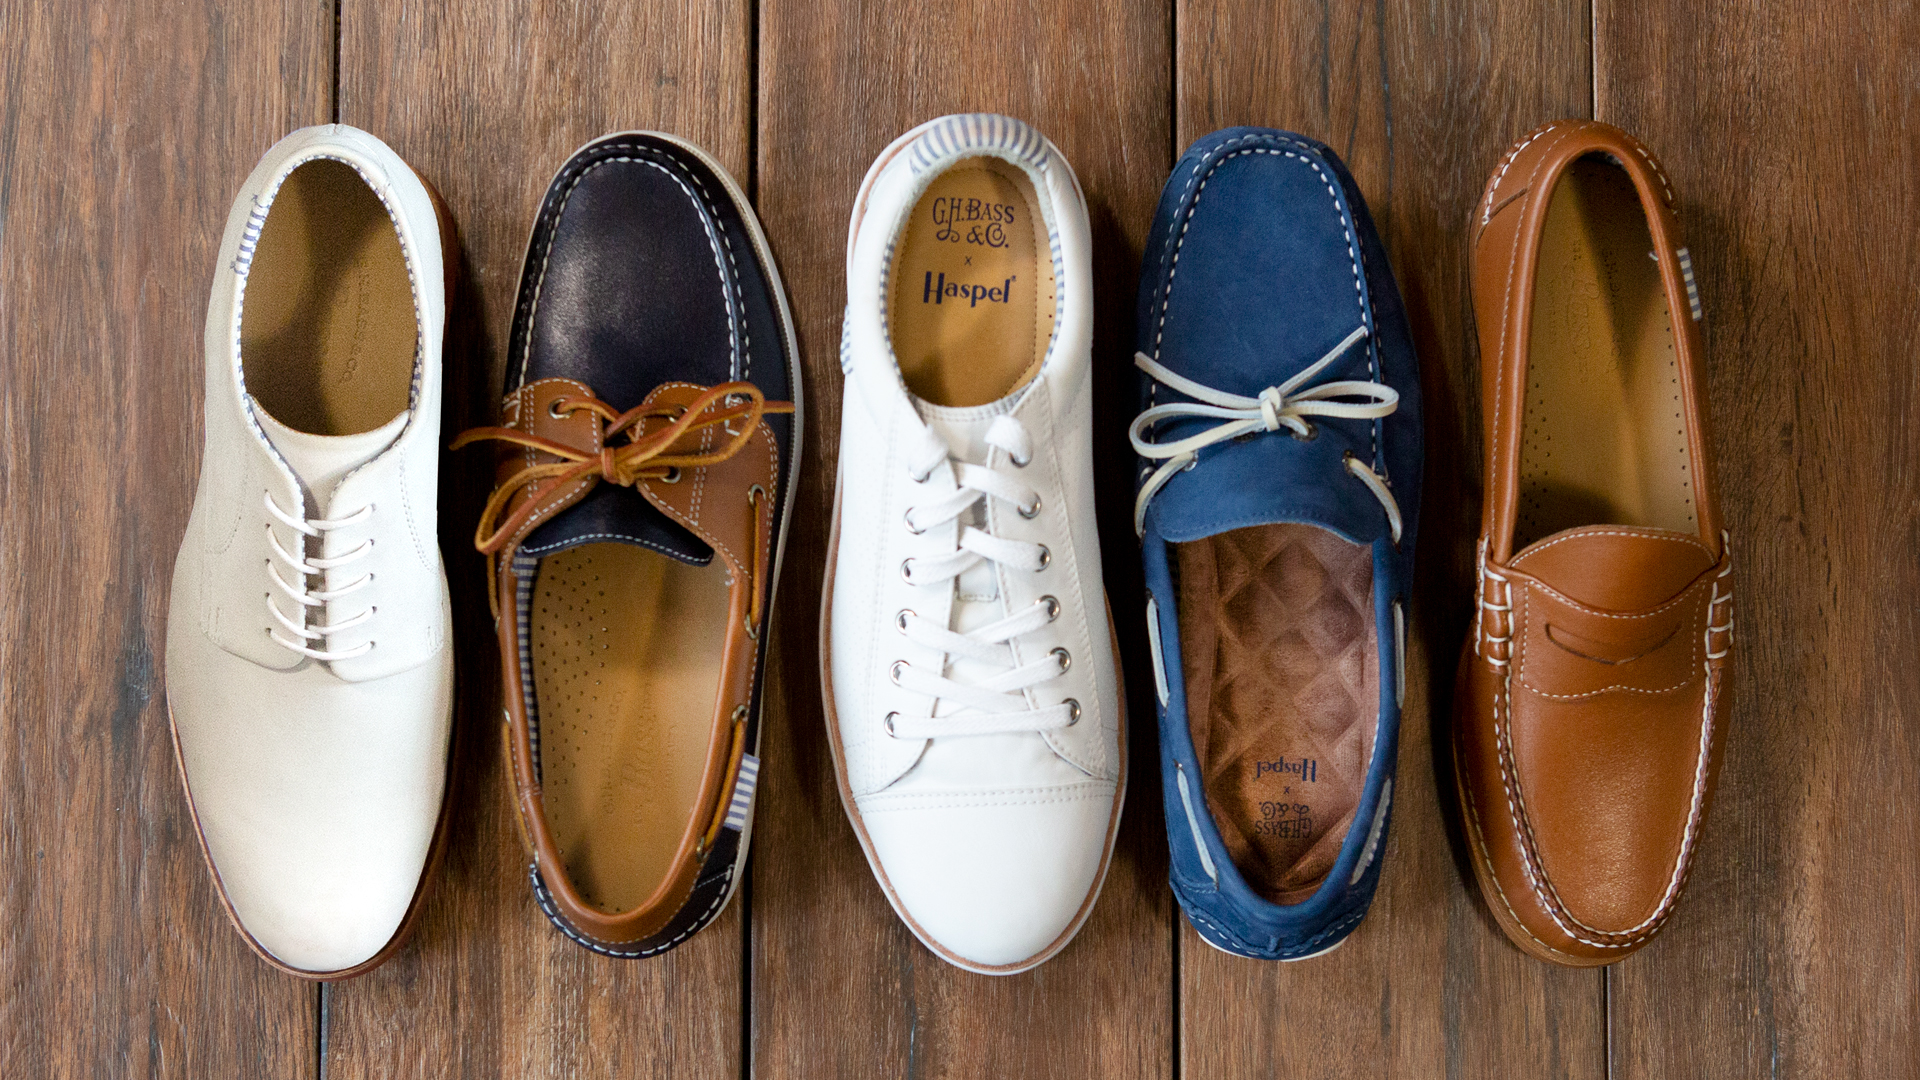 G.H. Bass & Co. and Haspel Launch Classy New Shoe Collection - The Manual